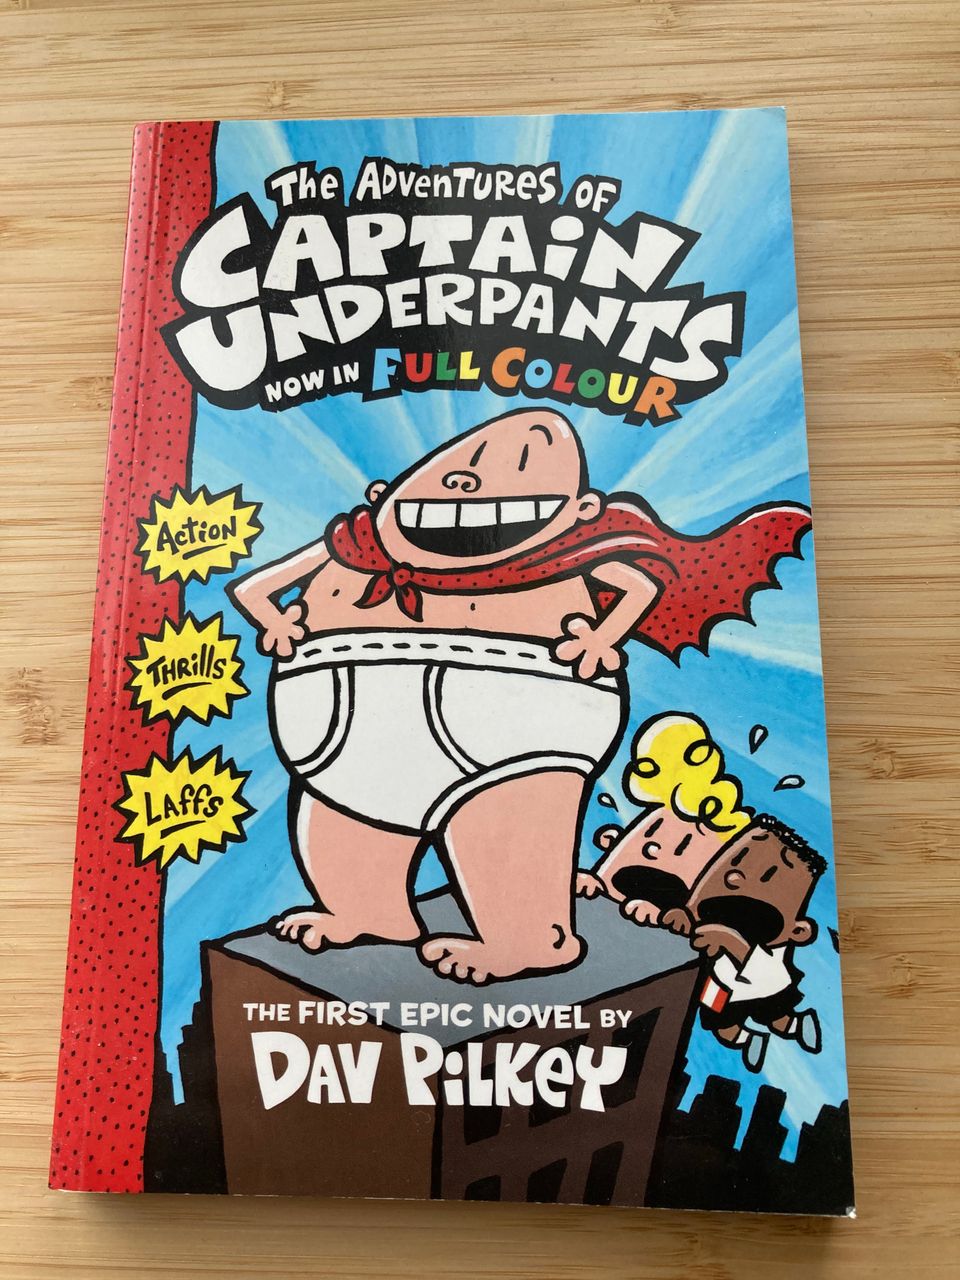 The Adventures of Captain Underpants in Full Colour